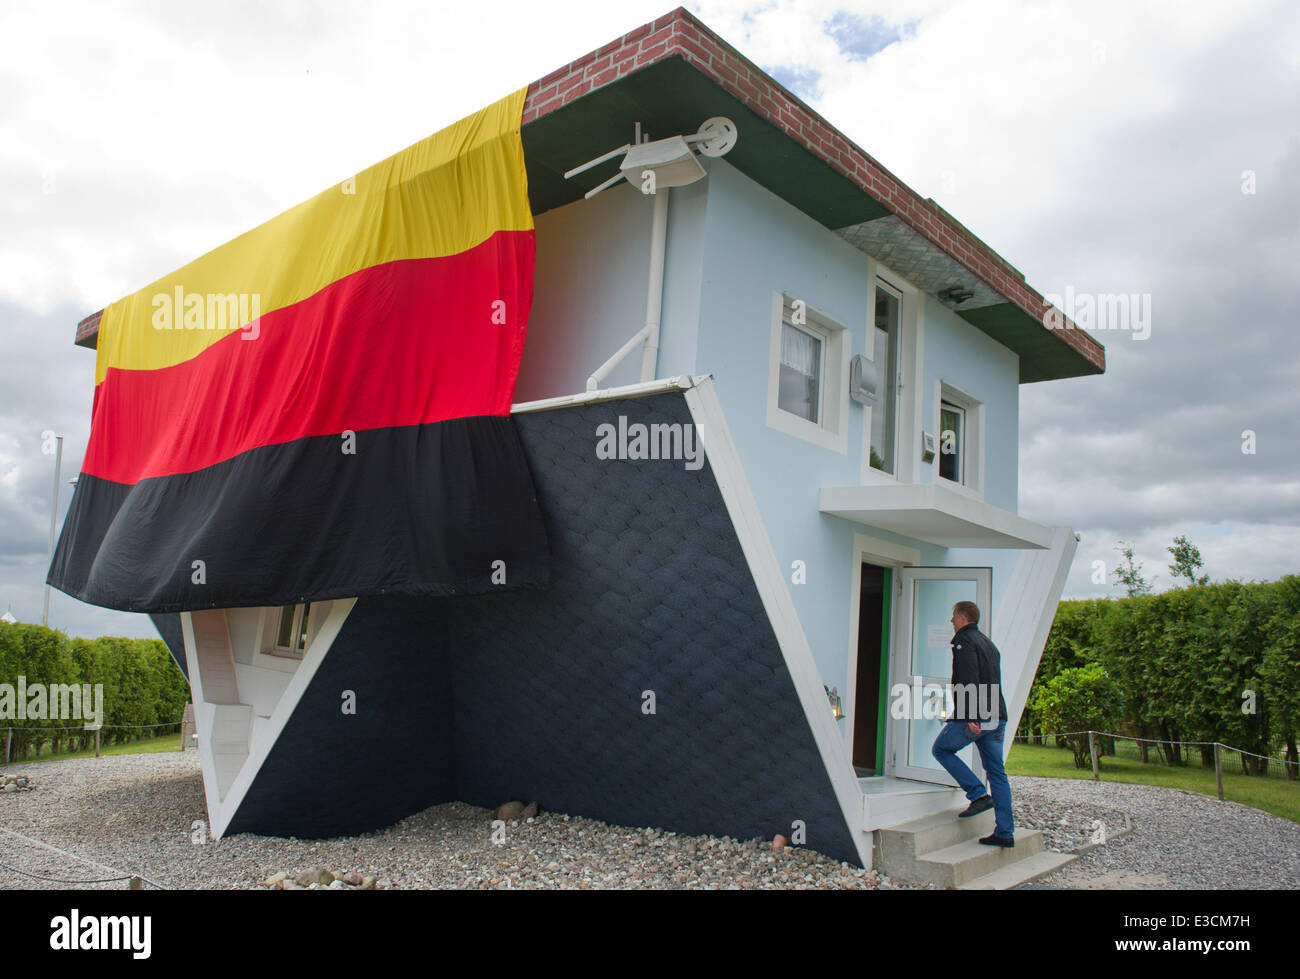 Usedom, Germany. 23rd June, 2014. Employees of the tourist attraction 'The World stands on its Head' have hoisted a German flag above the upside down house in Trassenheide on Usedom, Germany, 23 June 2014. The flag measures about four times nine metres and, in accordance with the upside down position of the house, has been attached the wrong way round. Photo: STEFAN SAUER/DPA/Alamy Live News Stock Photo